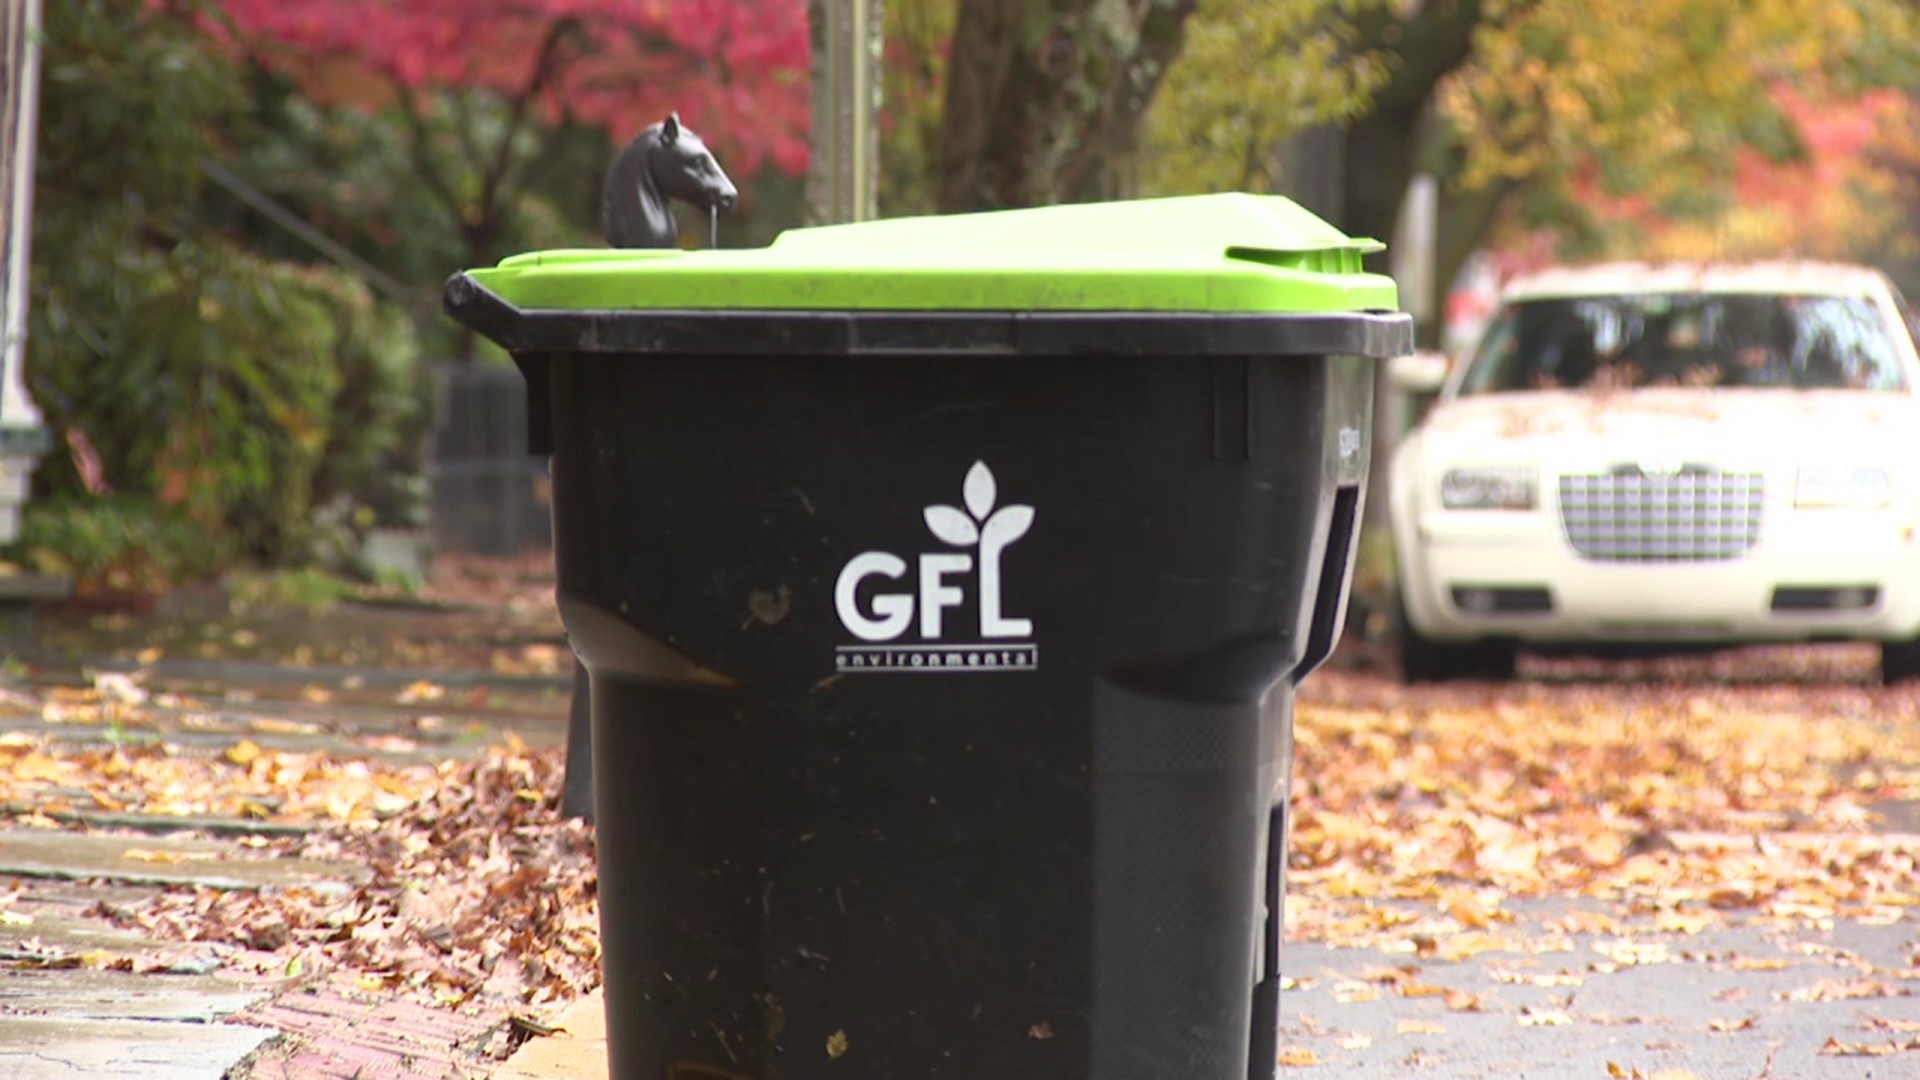 It's a regular chore we all must do — dragging our garbage out to the curb on trash day. But for residents of Stroudsburg, garbage day never seems to end.